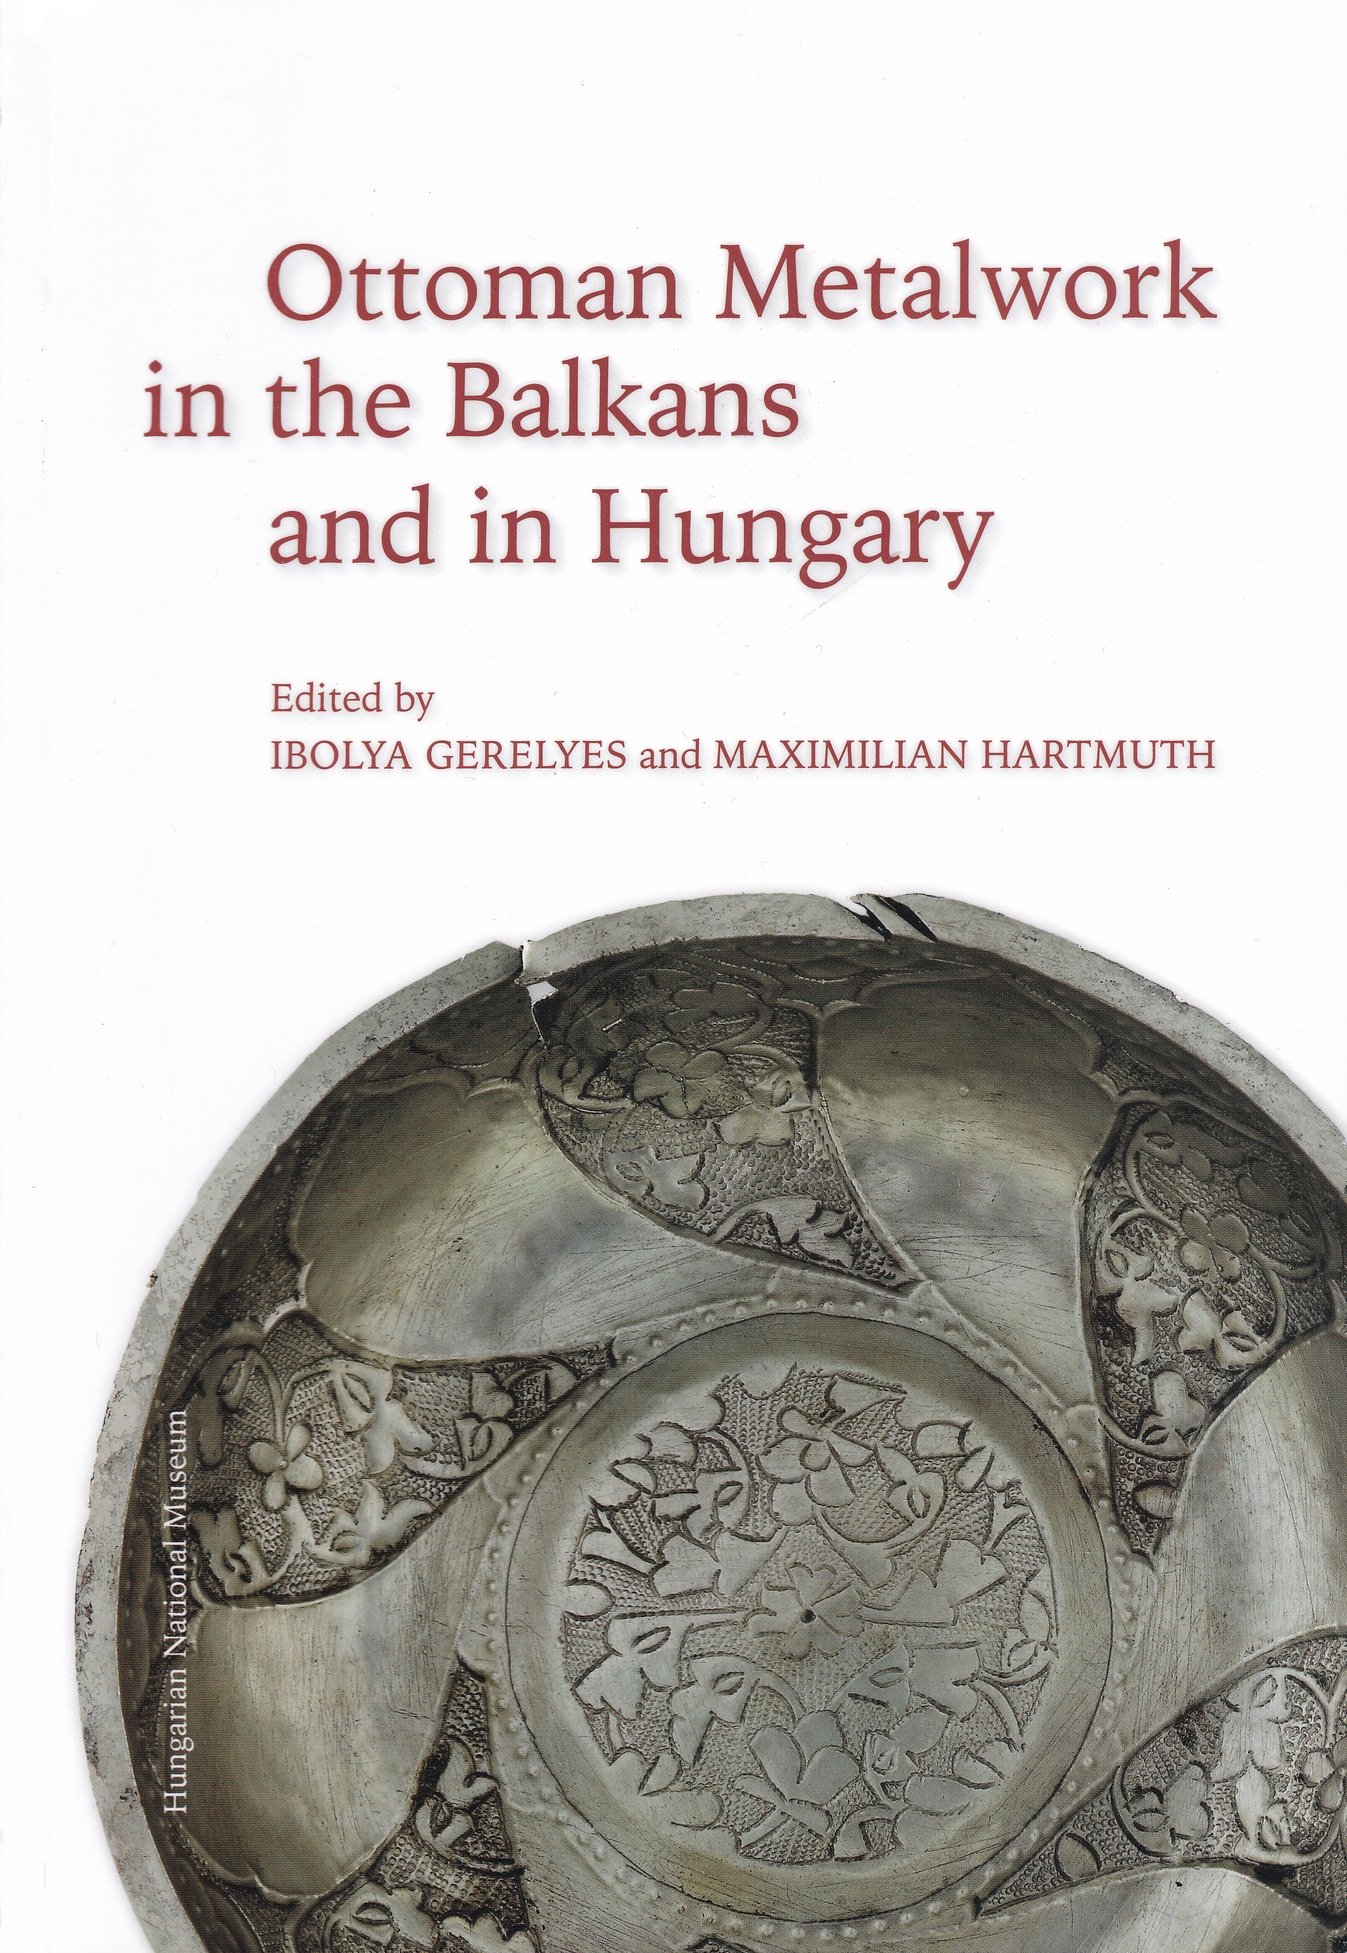 Ottoman metalwork in the Balkans and in Hungary (Rippl-Rónai Múzeum CC BY-NC-ND)